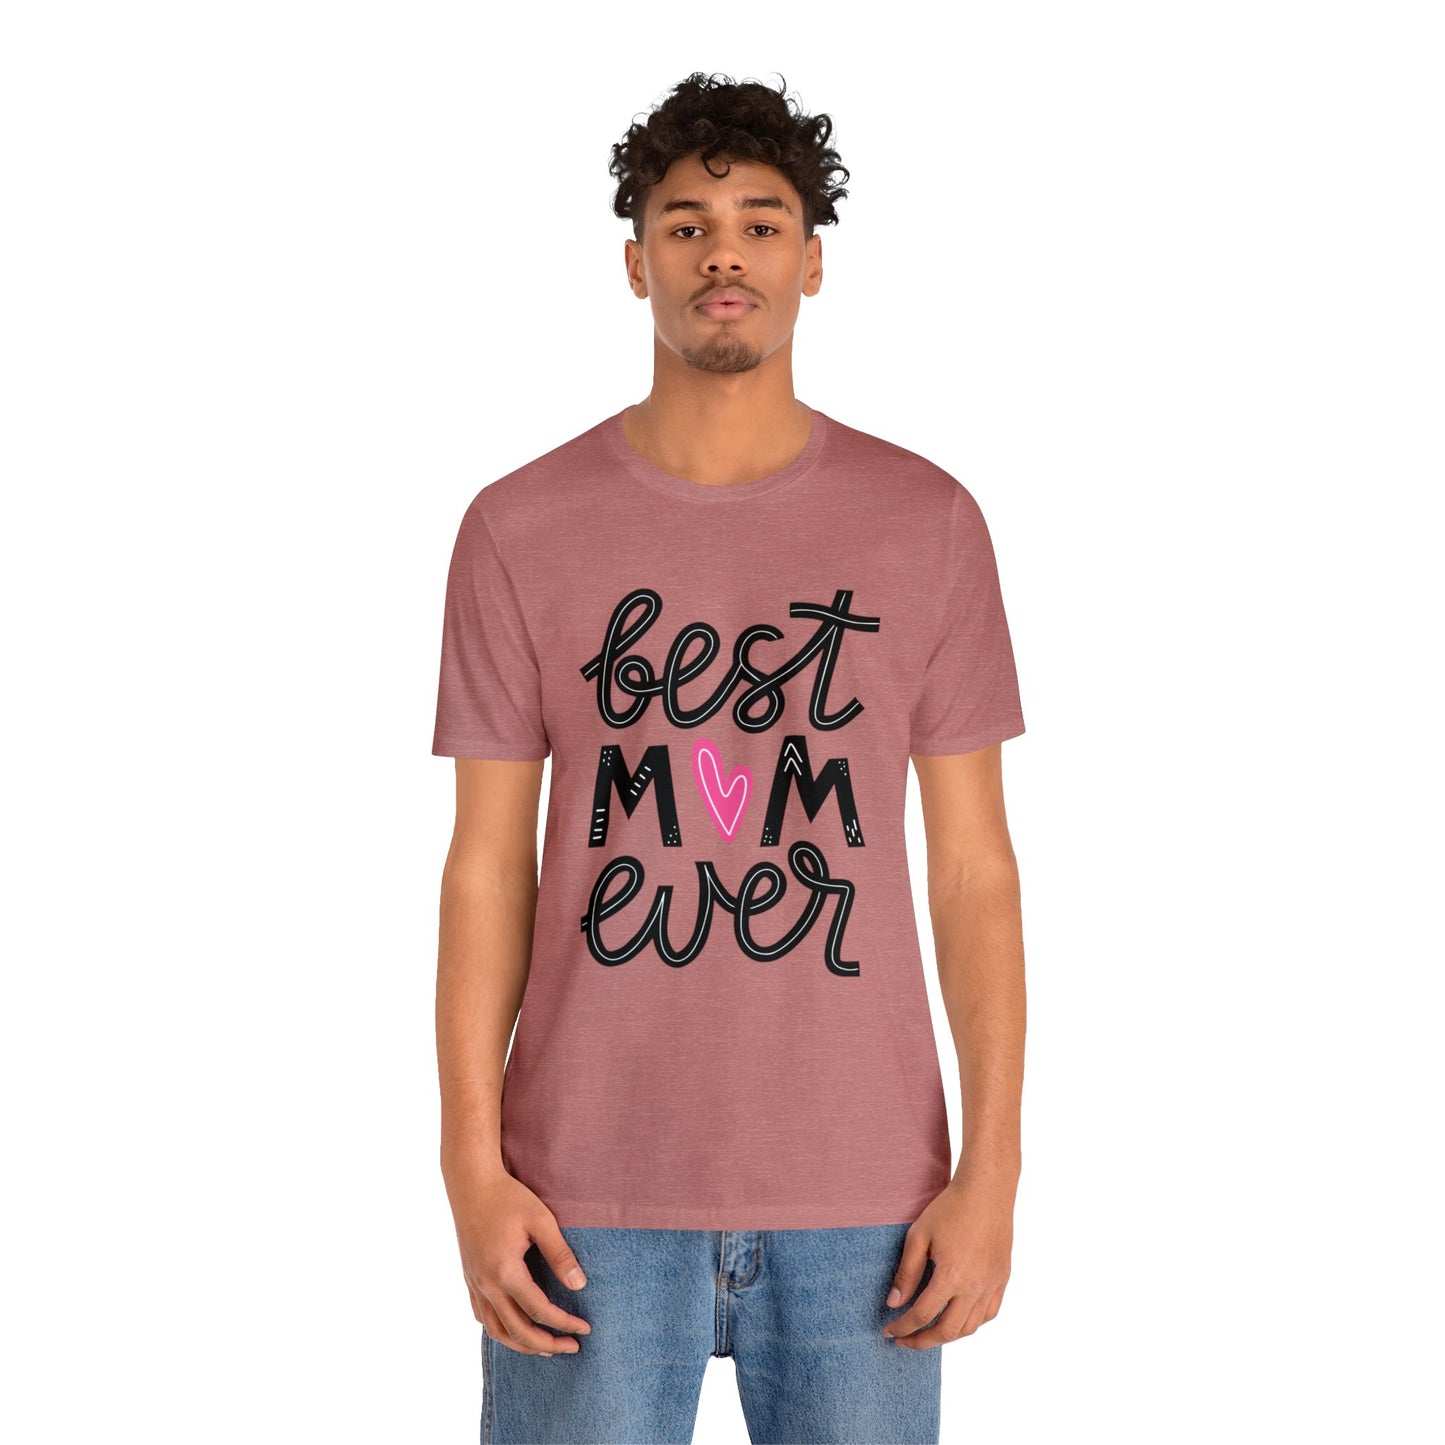 Best Mom Ever - Cute Mothers Day Shirts